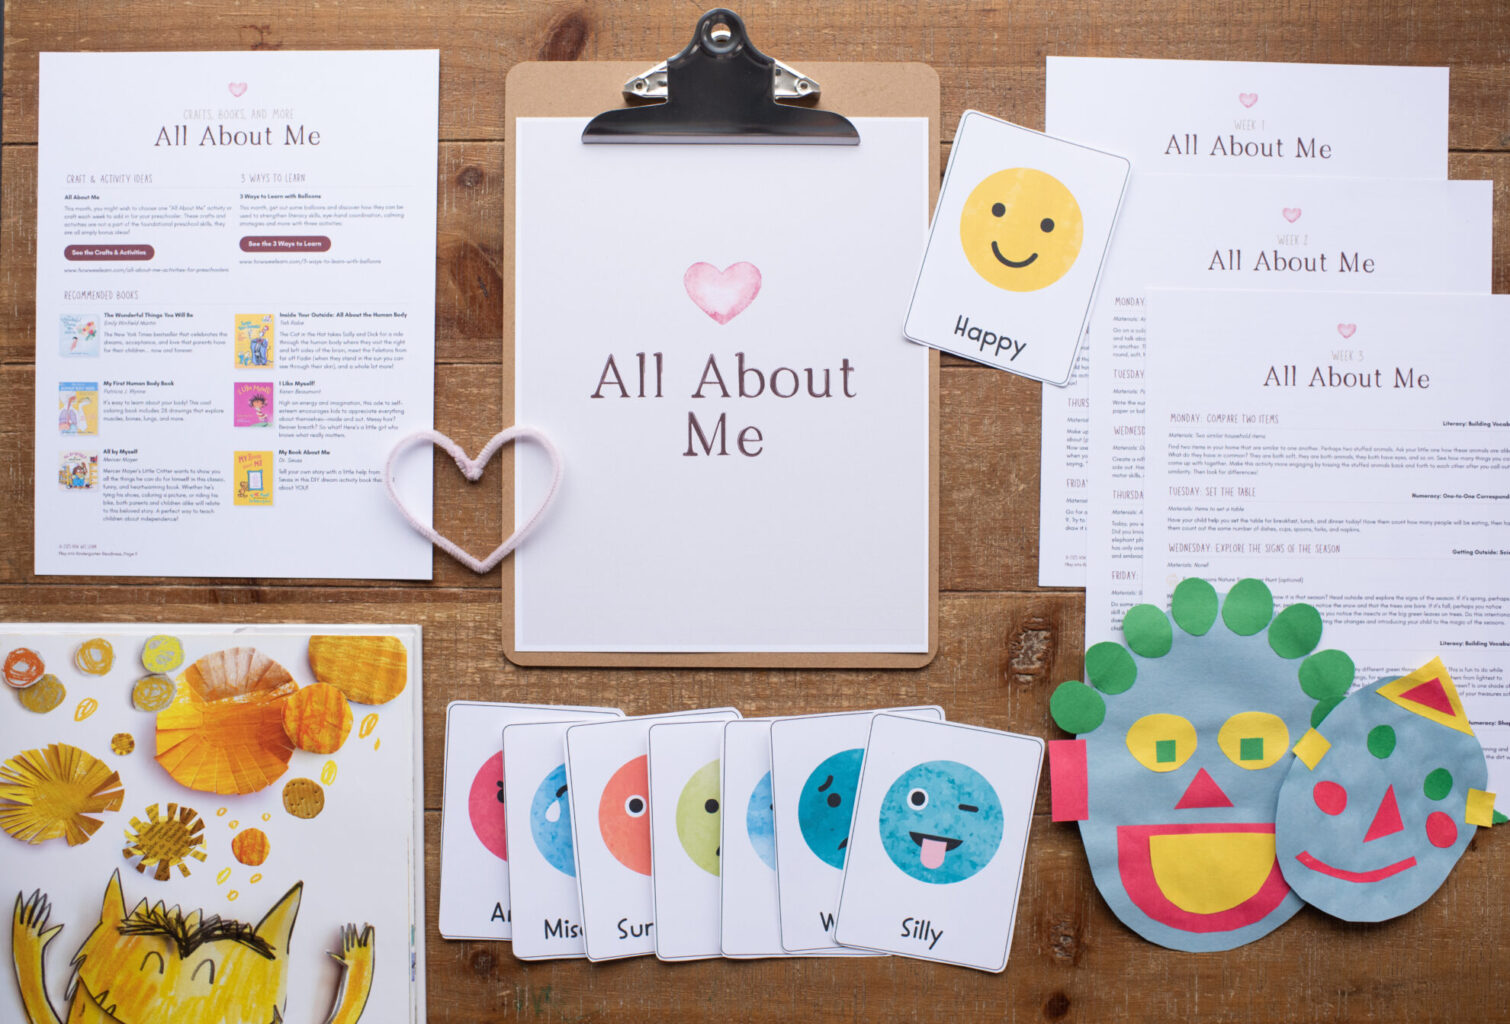 All About Me Activities for Preschoolers: All About Me Theme from Play into Kindergarten Readiness